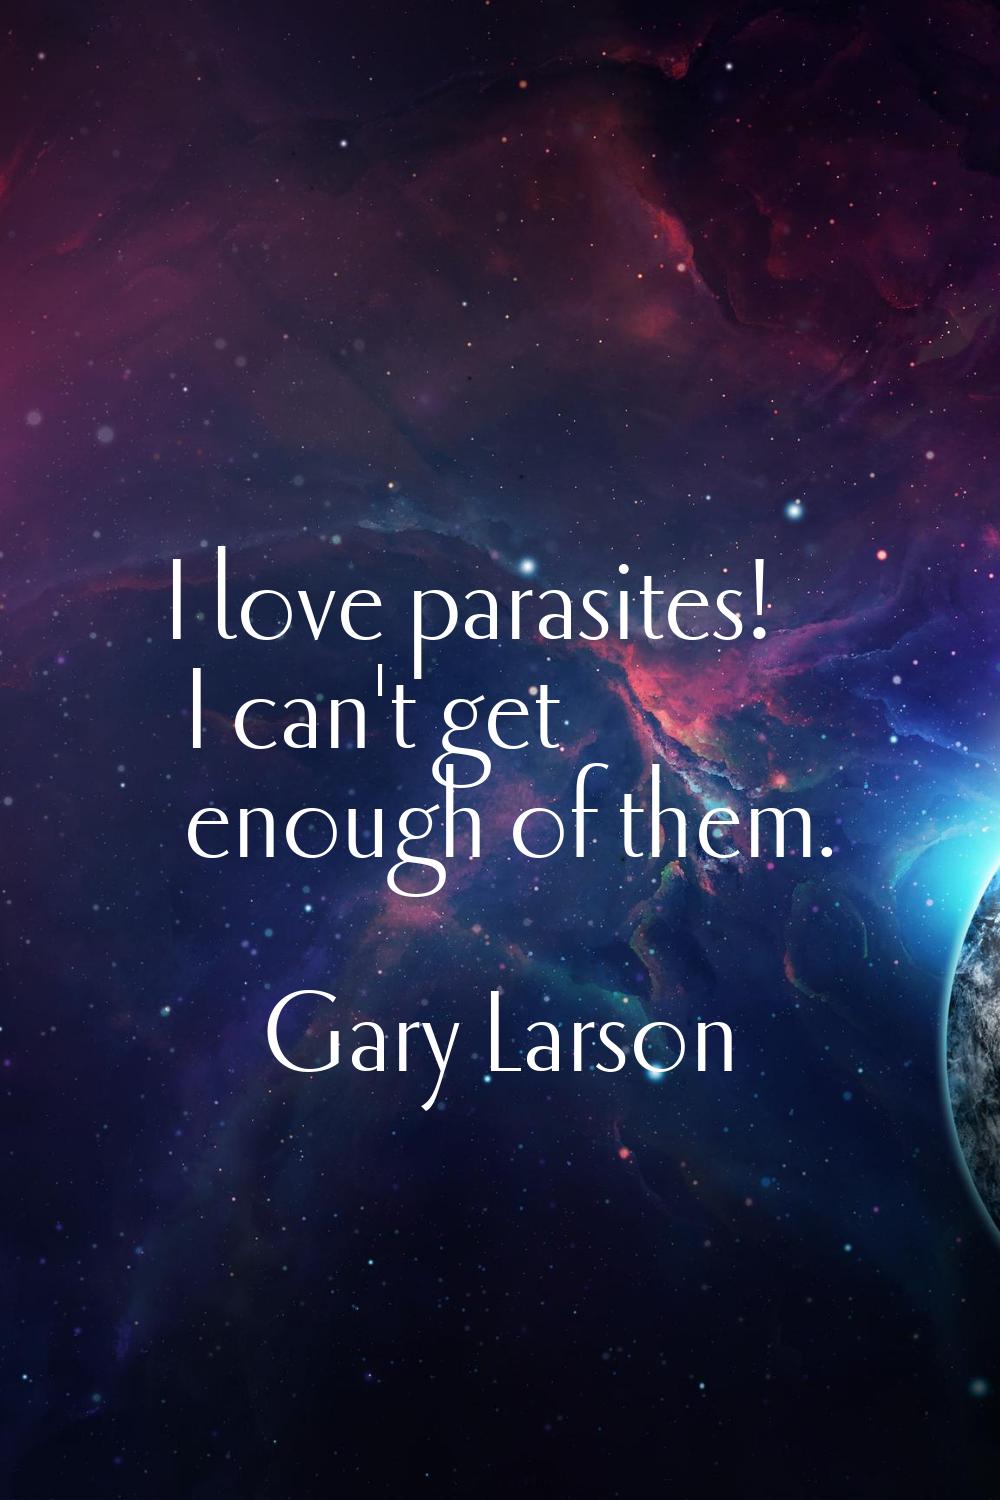 I love parasites! I can't get enough of them.